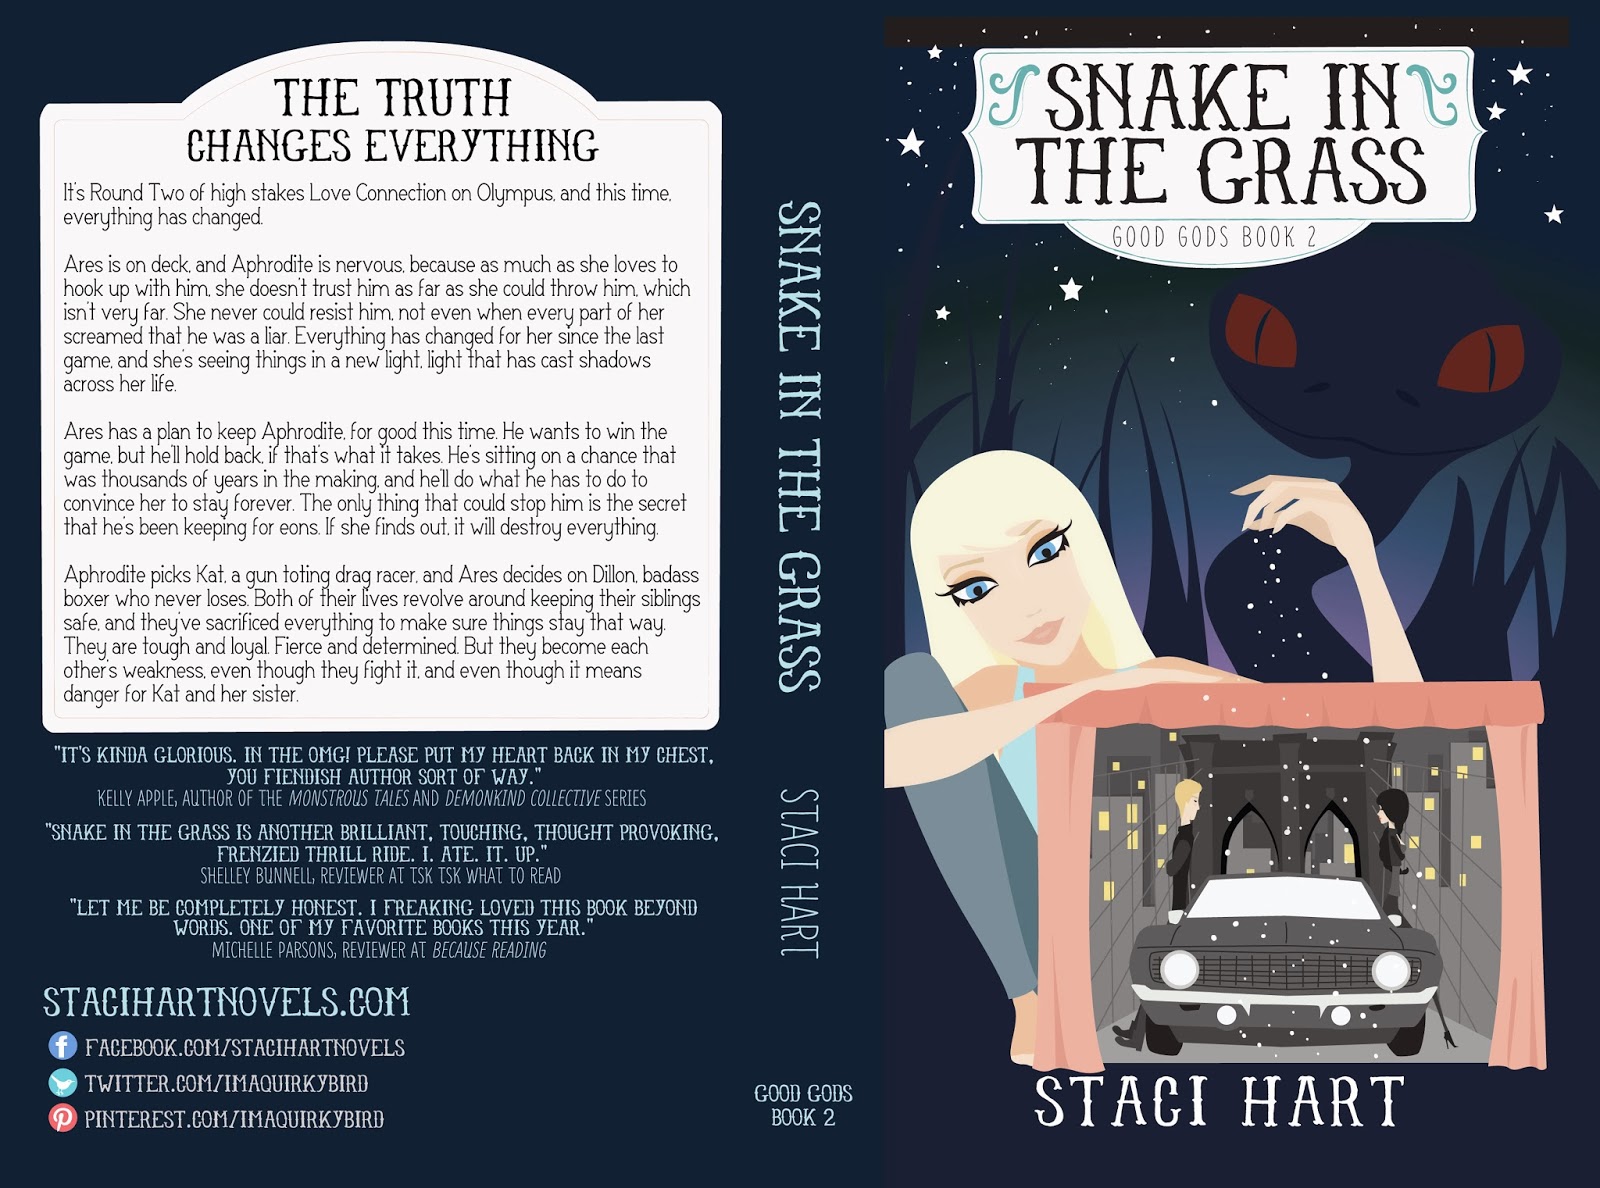 Snake in the Grass by Staci Hart